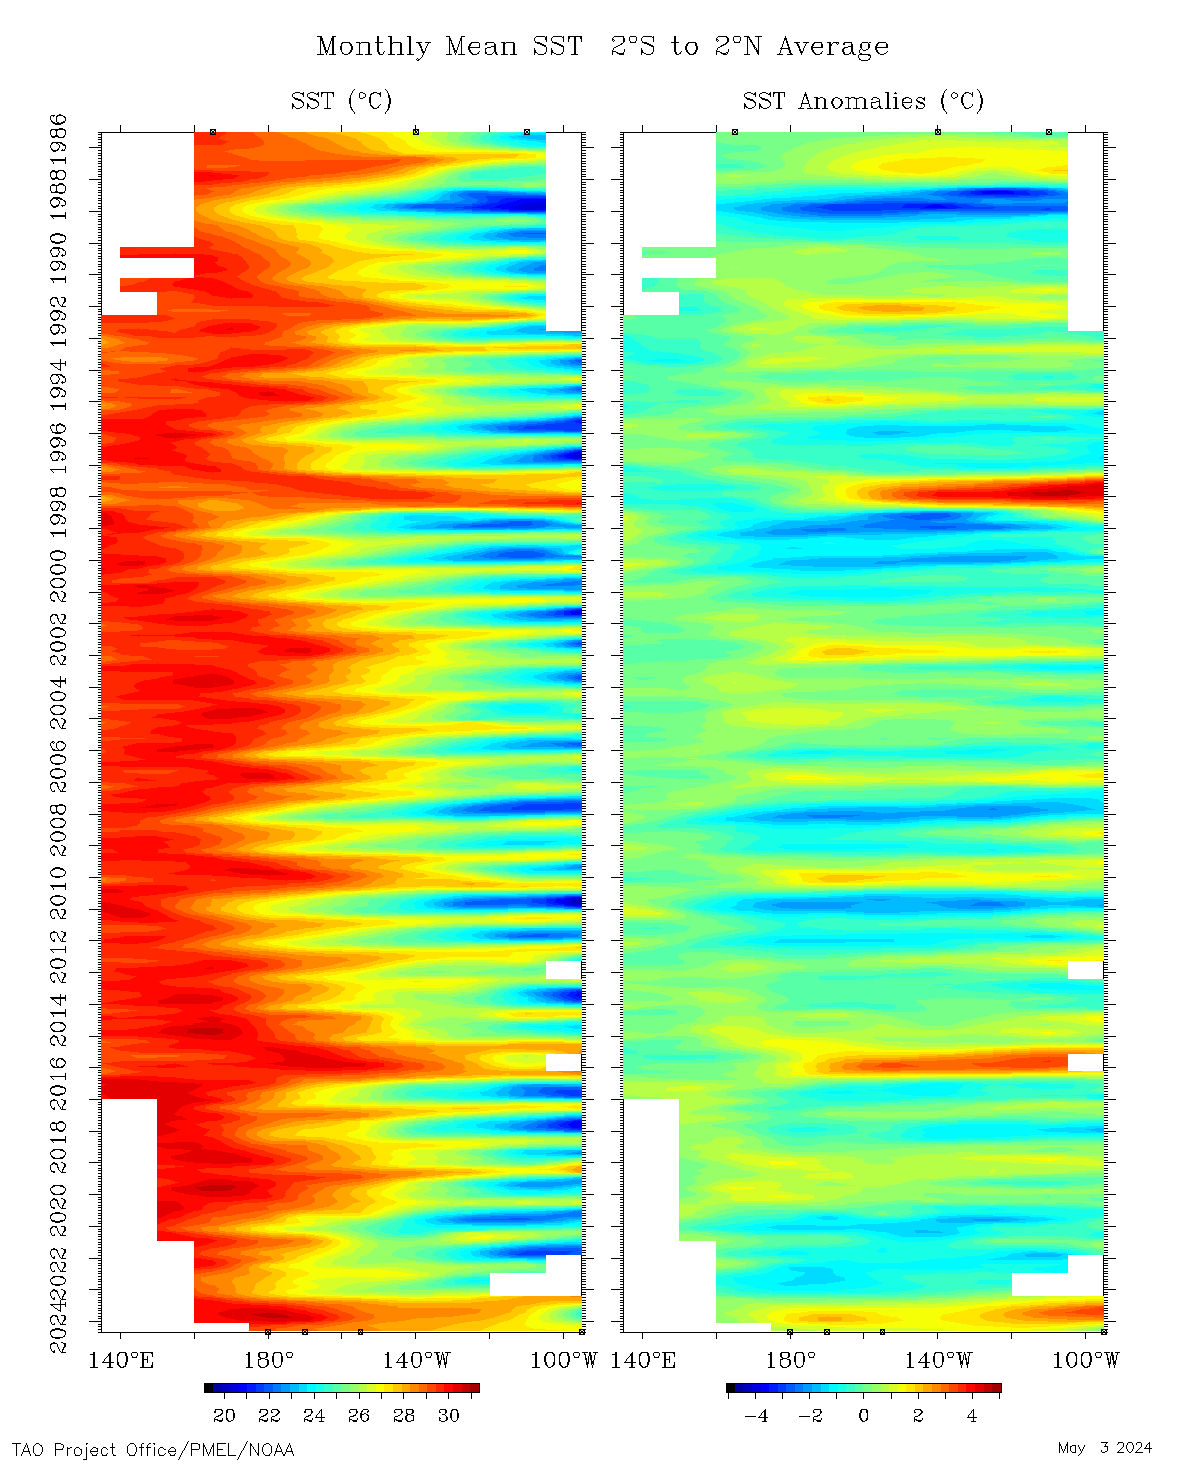 Monthly TAO/TRITON SST and Anomalies 2S to 2N (longitude-time plot)